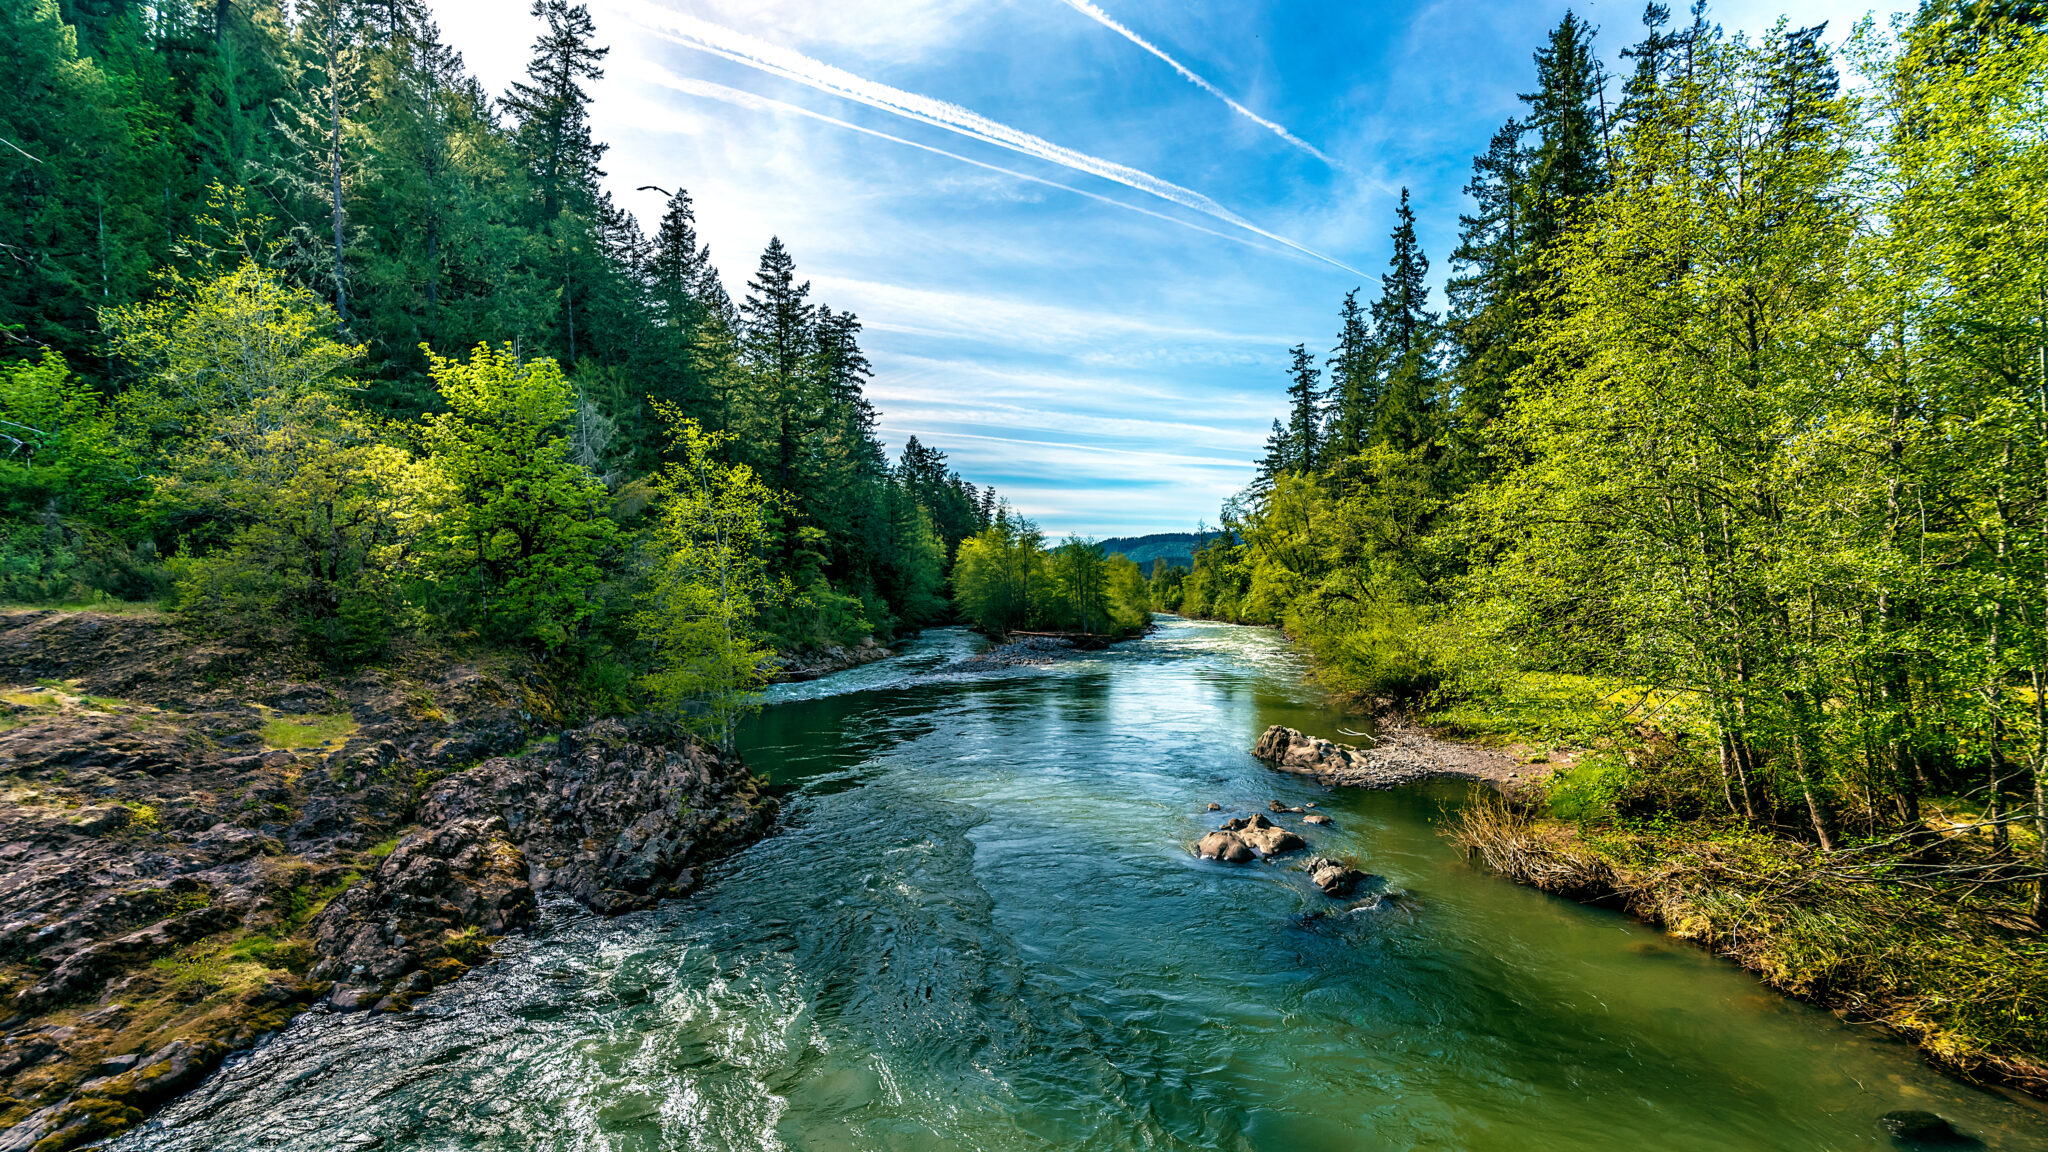 A,Bright,Blue,River,Flowing,Through,An,Oregon,Forest,As